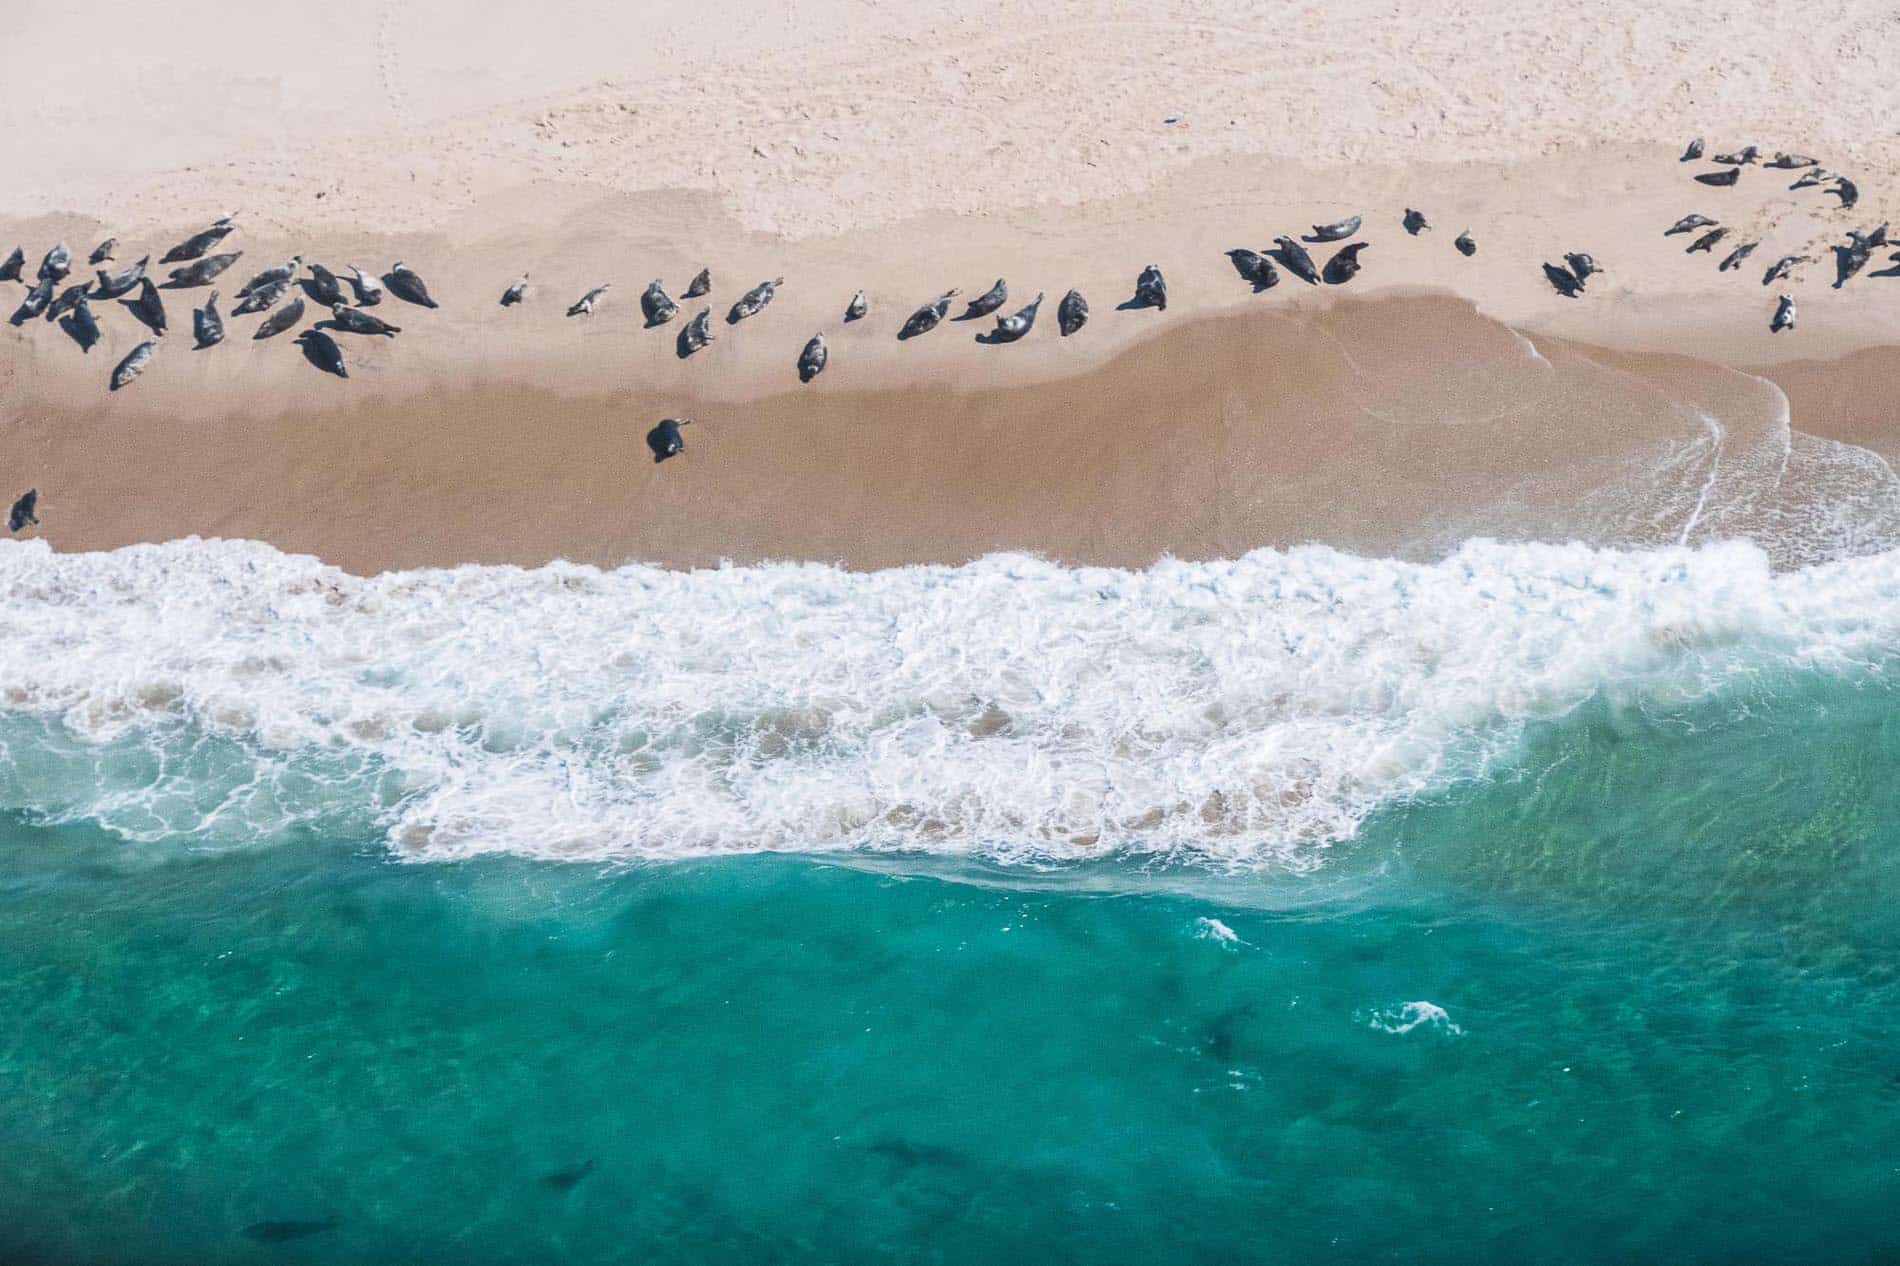 Aerial view of grey seals on Sable Island, Nova Scotia - Image by Geordie Mott and Picture Perfect Tours.